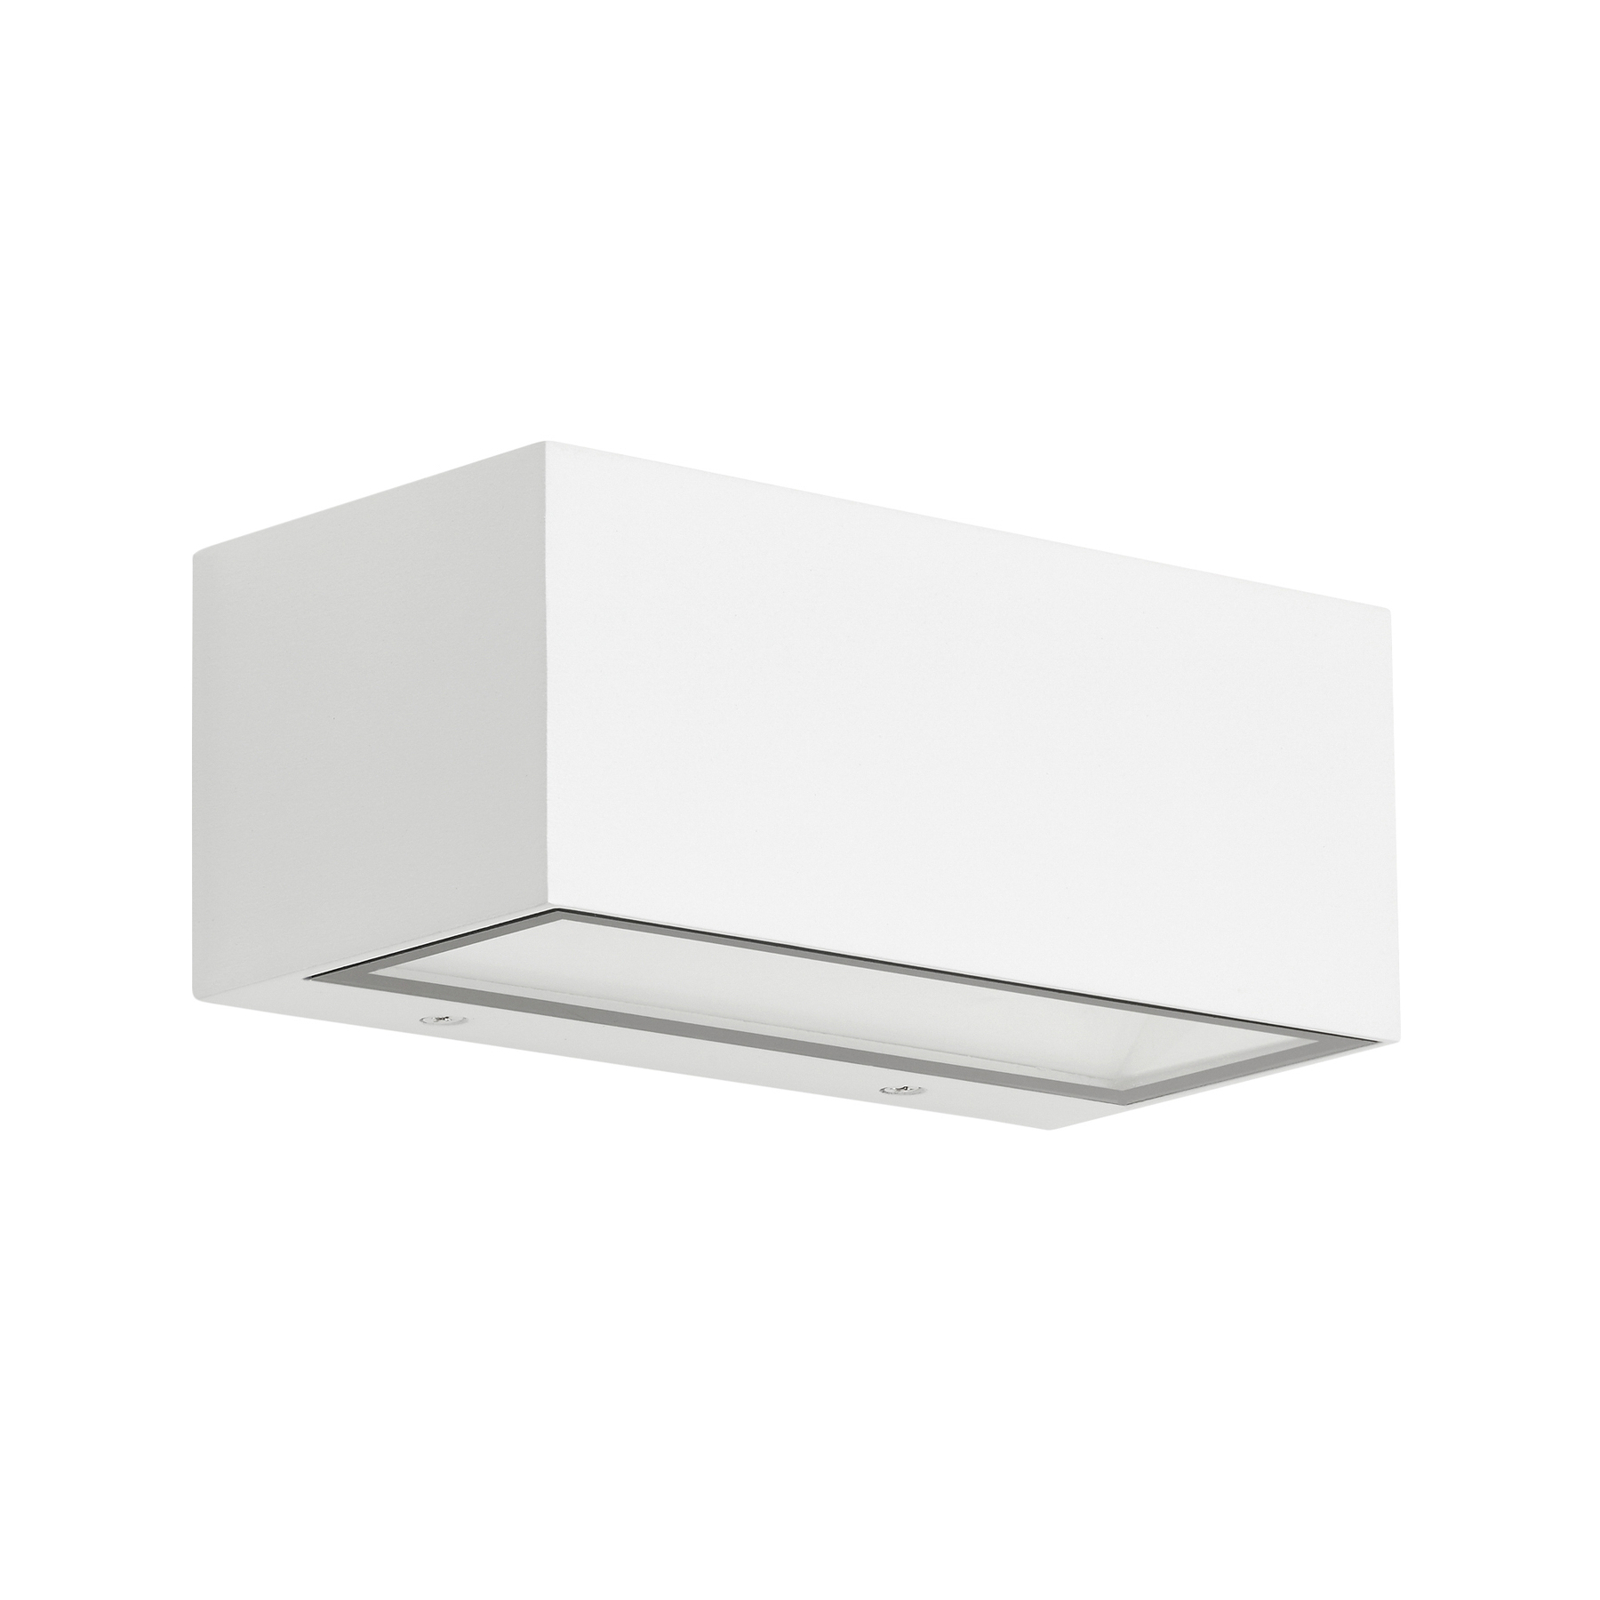 LED outdoor wall light Monaco up/down white